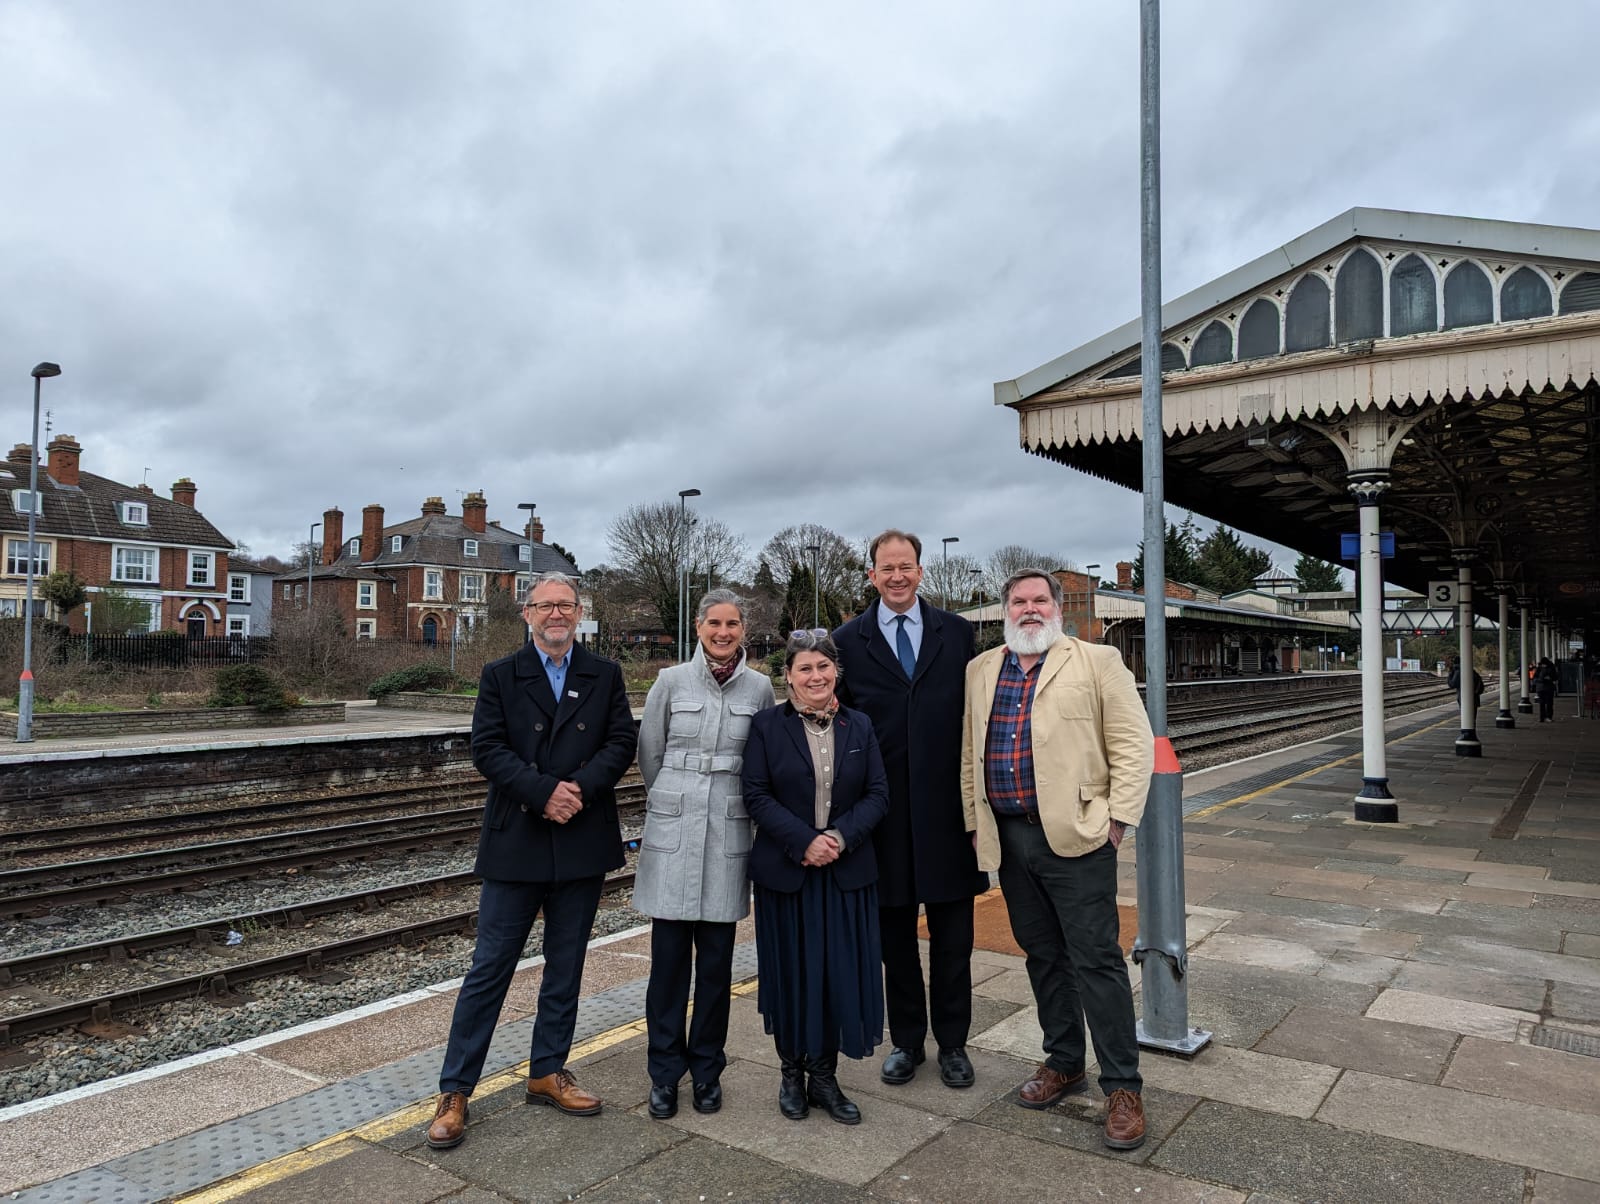 Local leaders show support for rail plans in Hereford